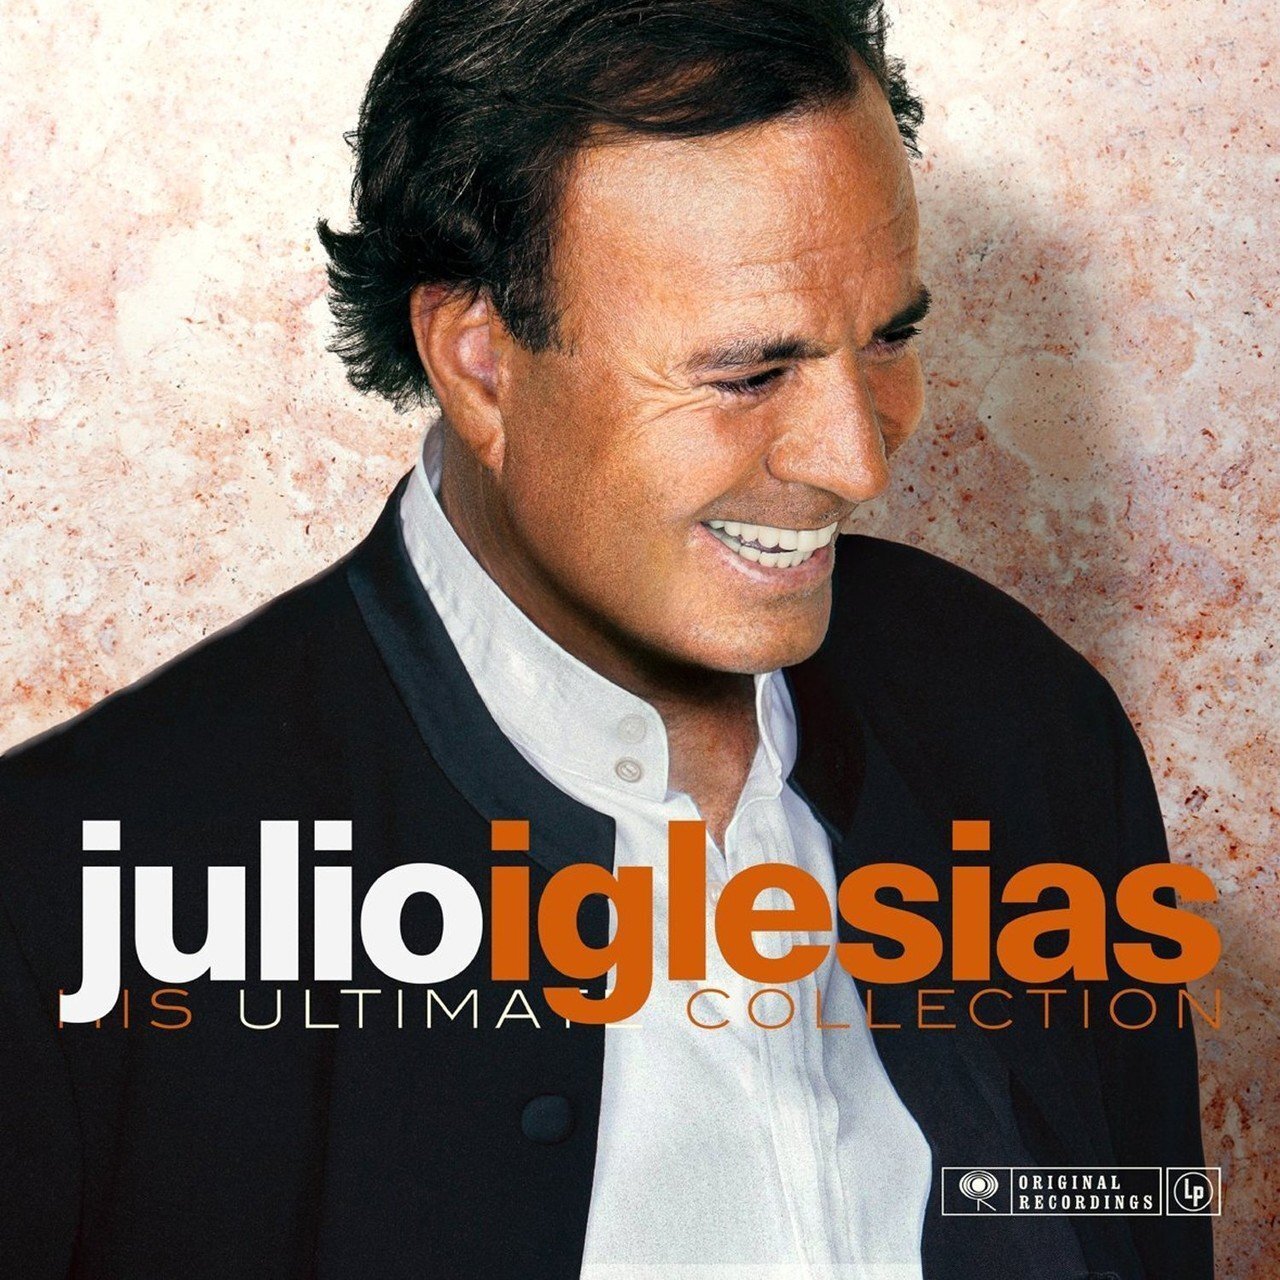 Julio Iglesias: His Ultimate Collection